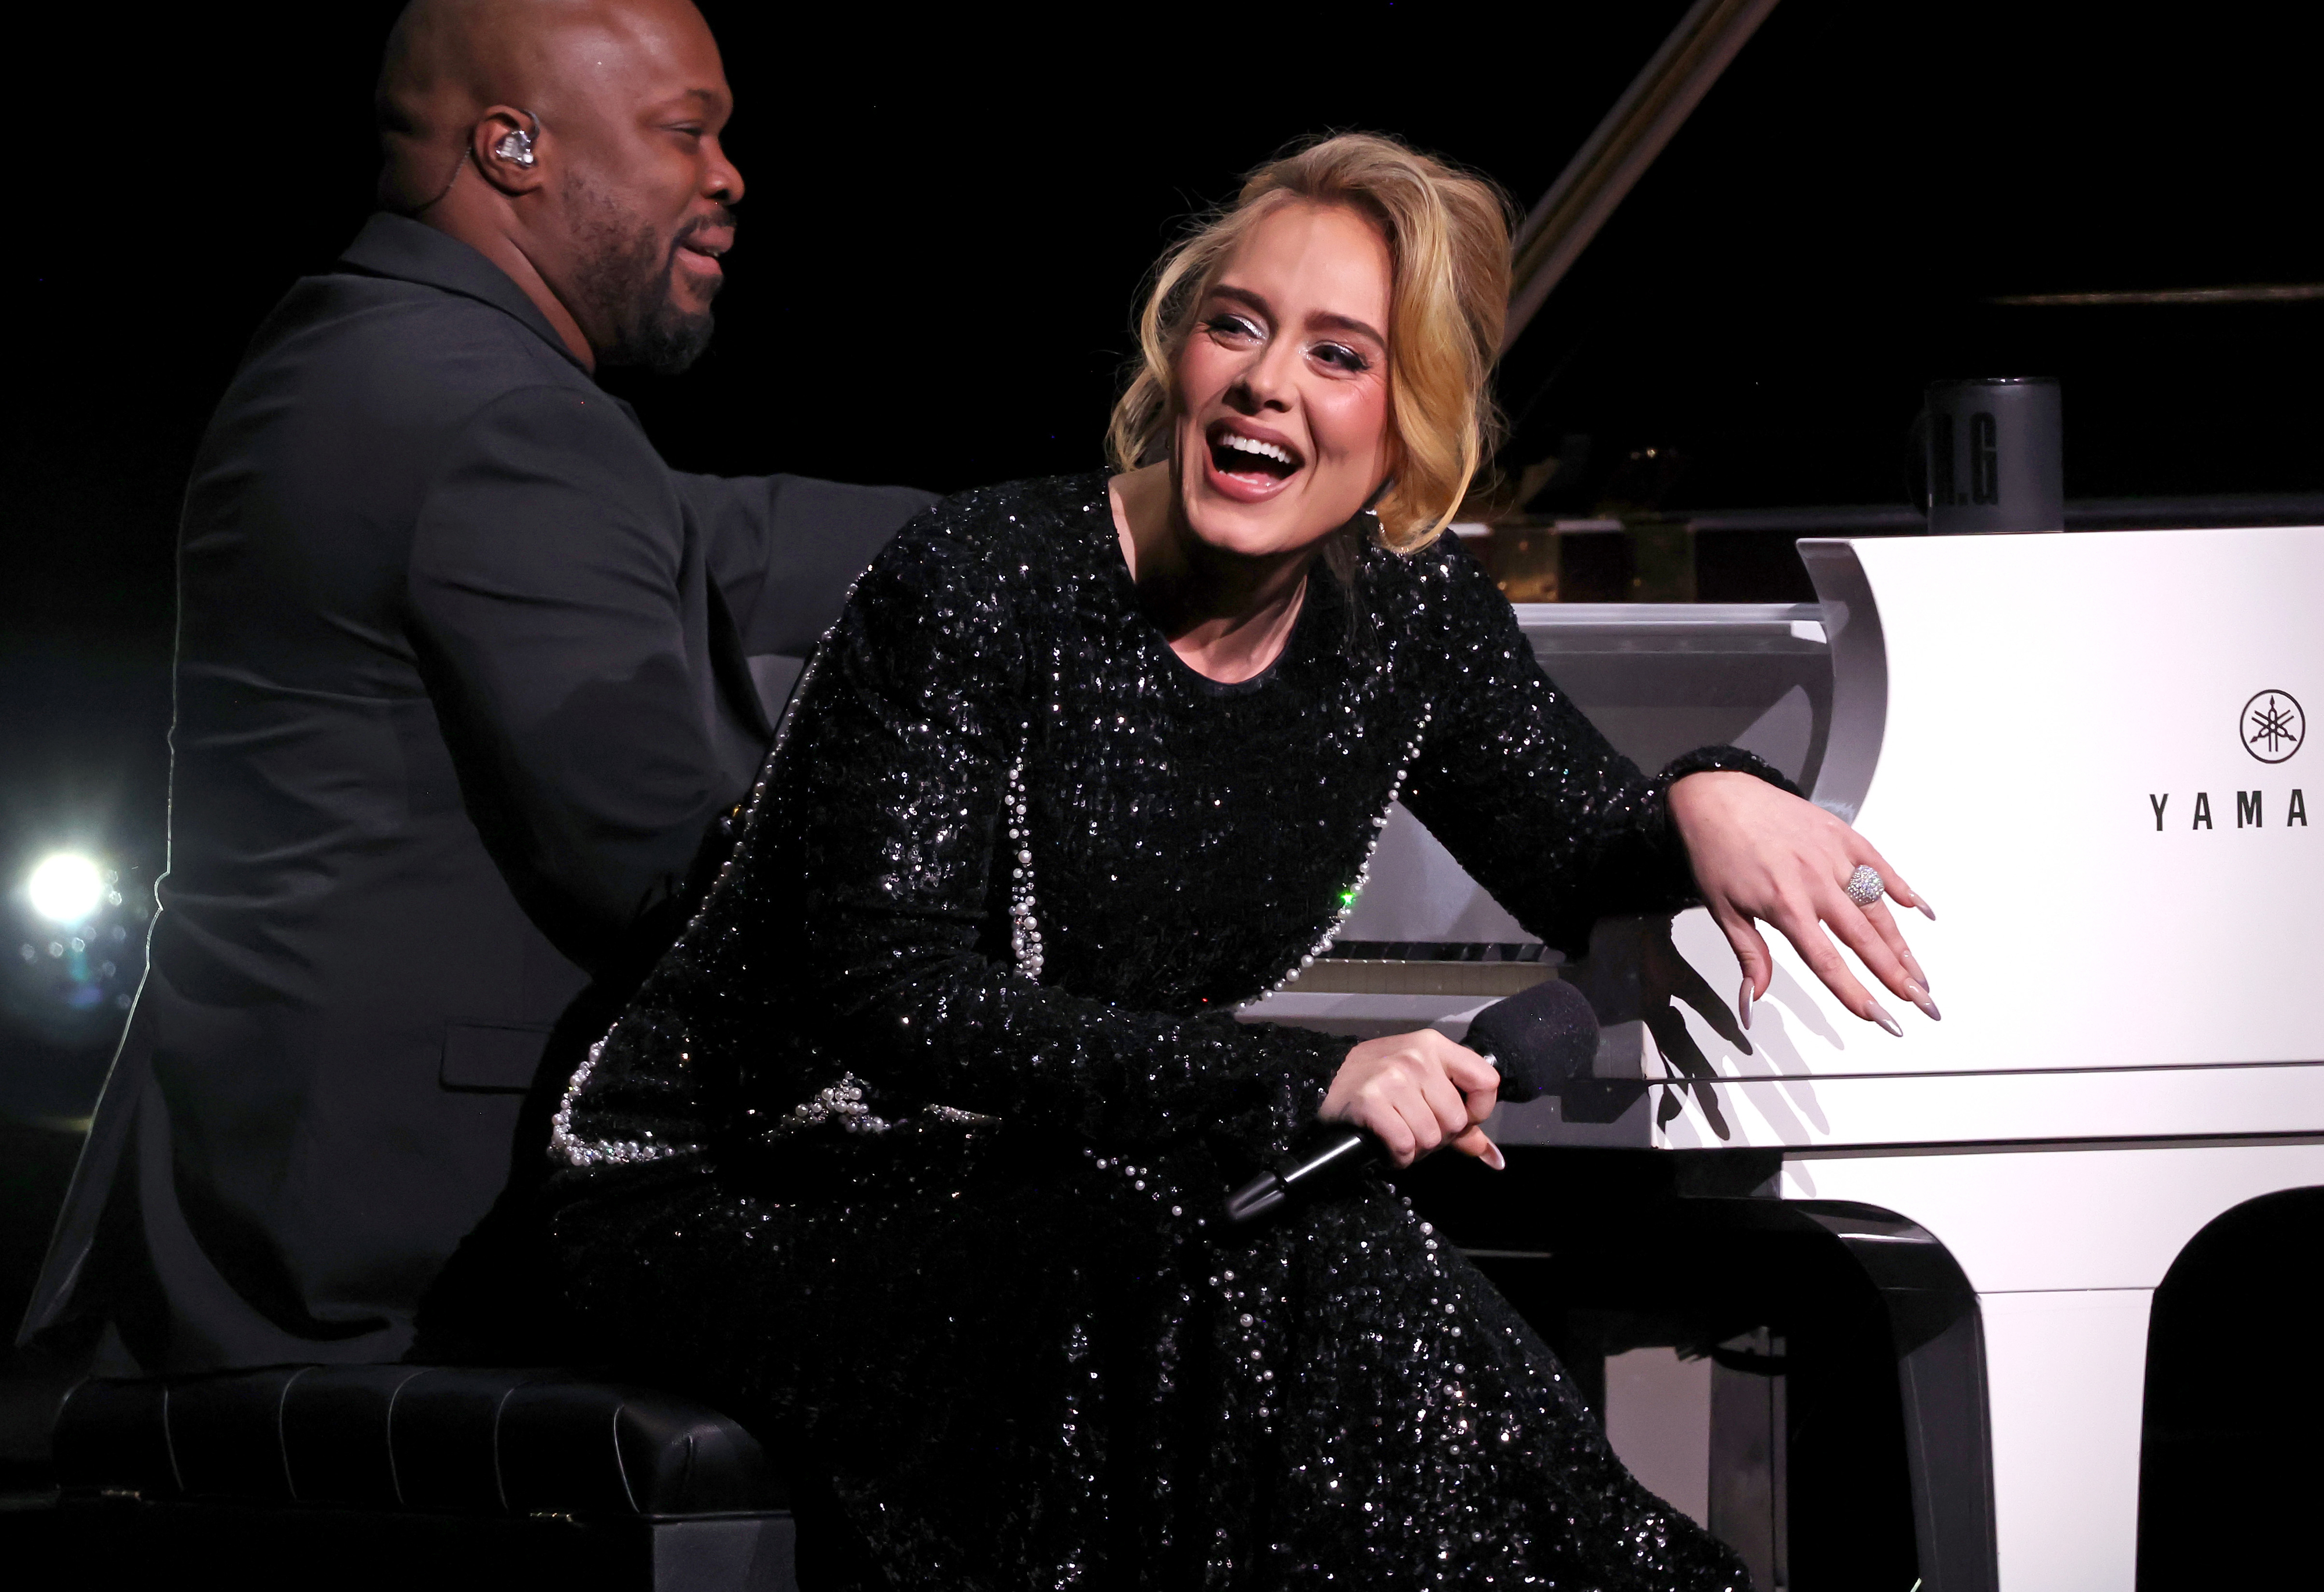 Adele, laughing in a sequined dress, with a pianist smiling behind her